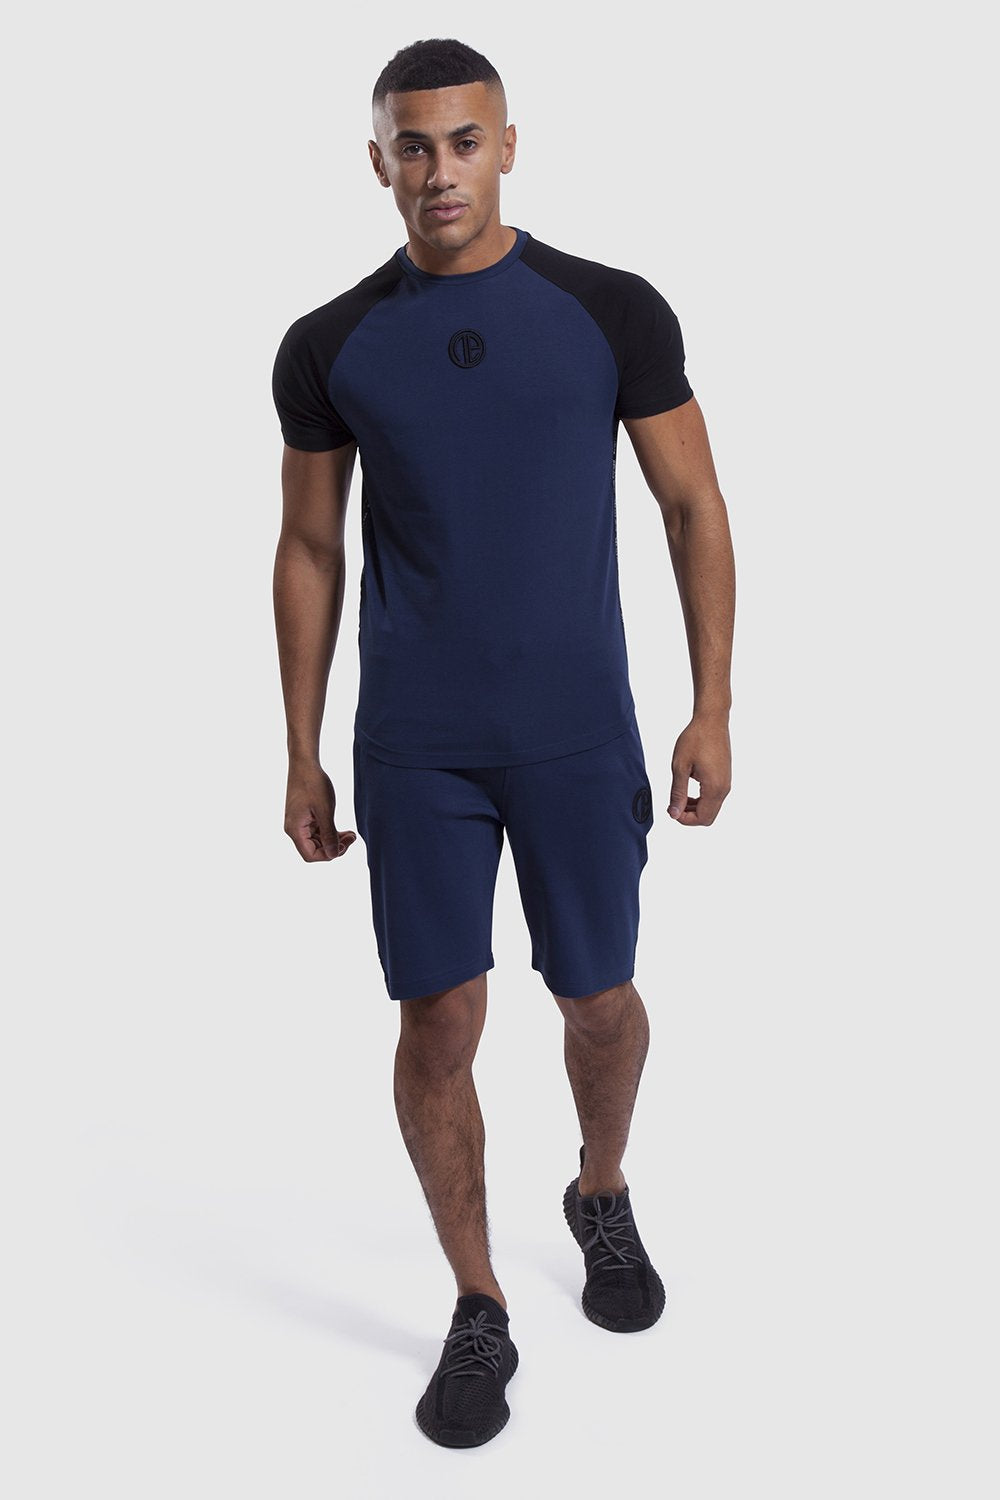 Matching training top and shorts in navy